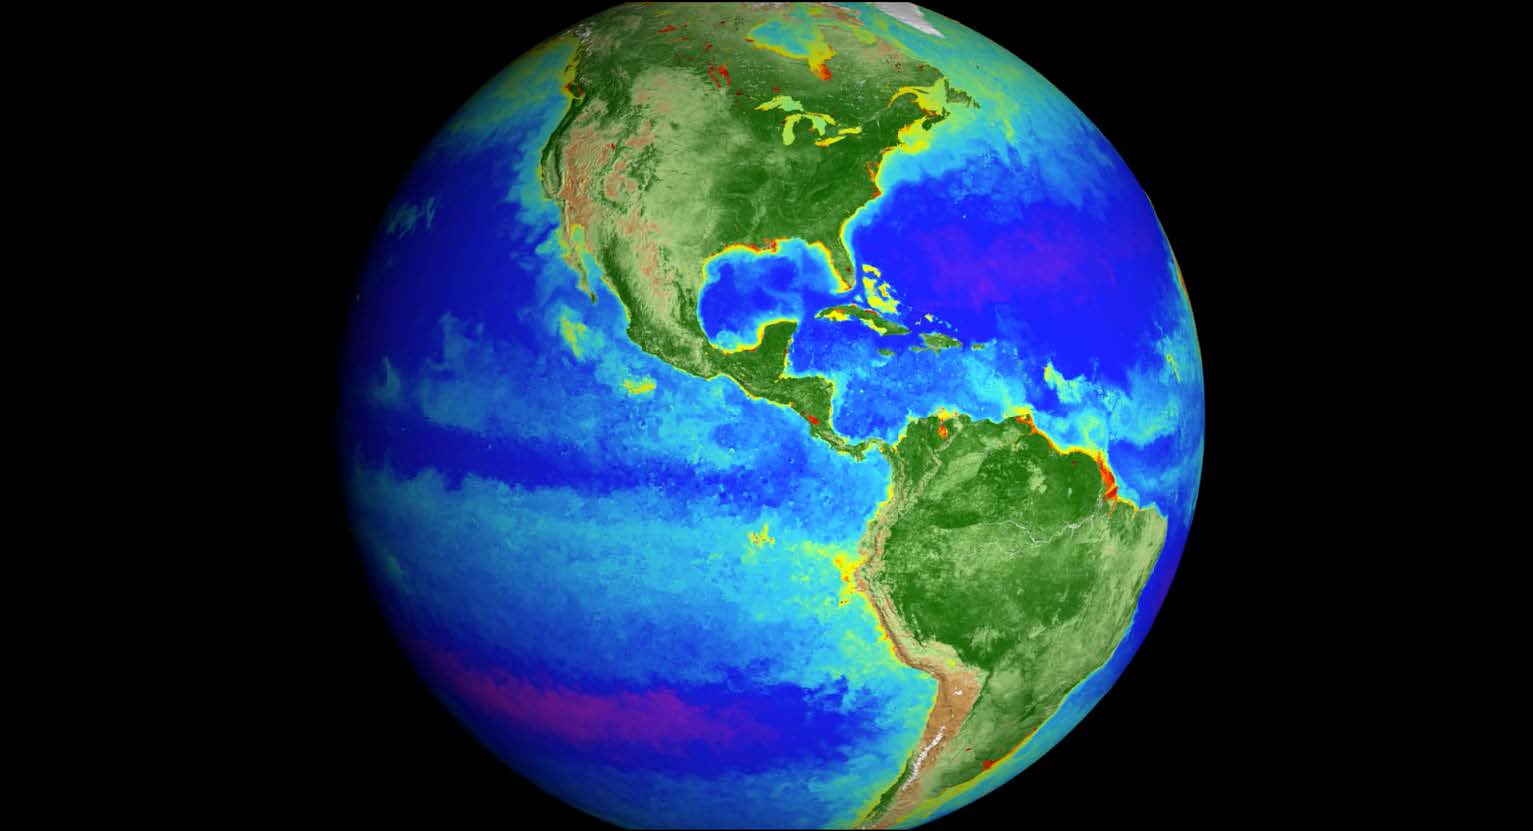 An illustration of Earth from space, with its land masses bright shades of green to brown, and its oceans vivid shades of blue, turquoise, and violet.